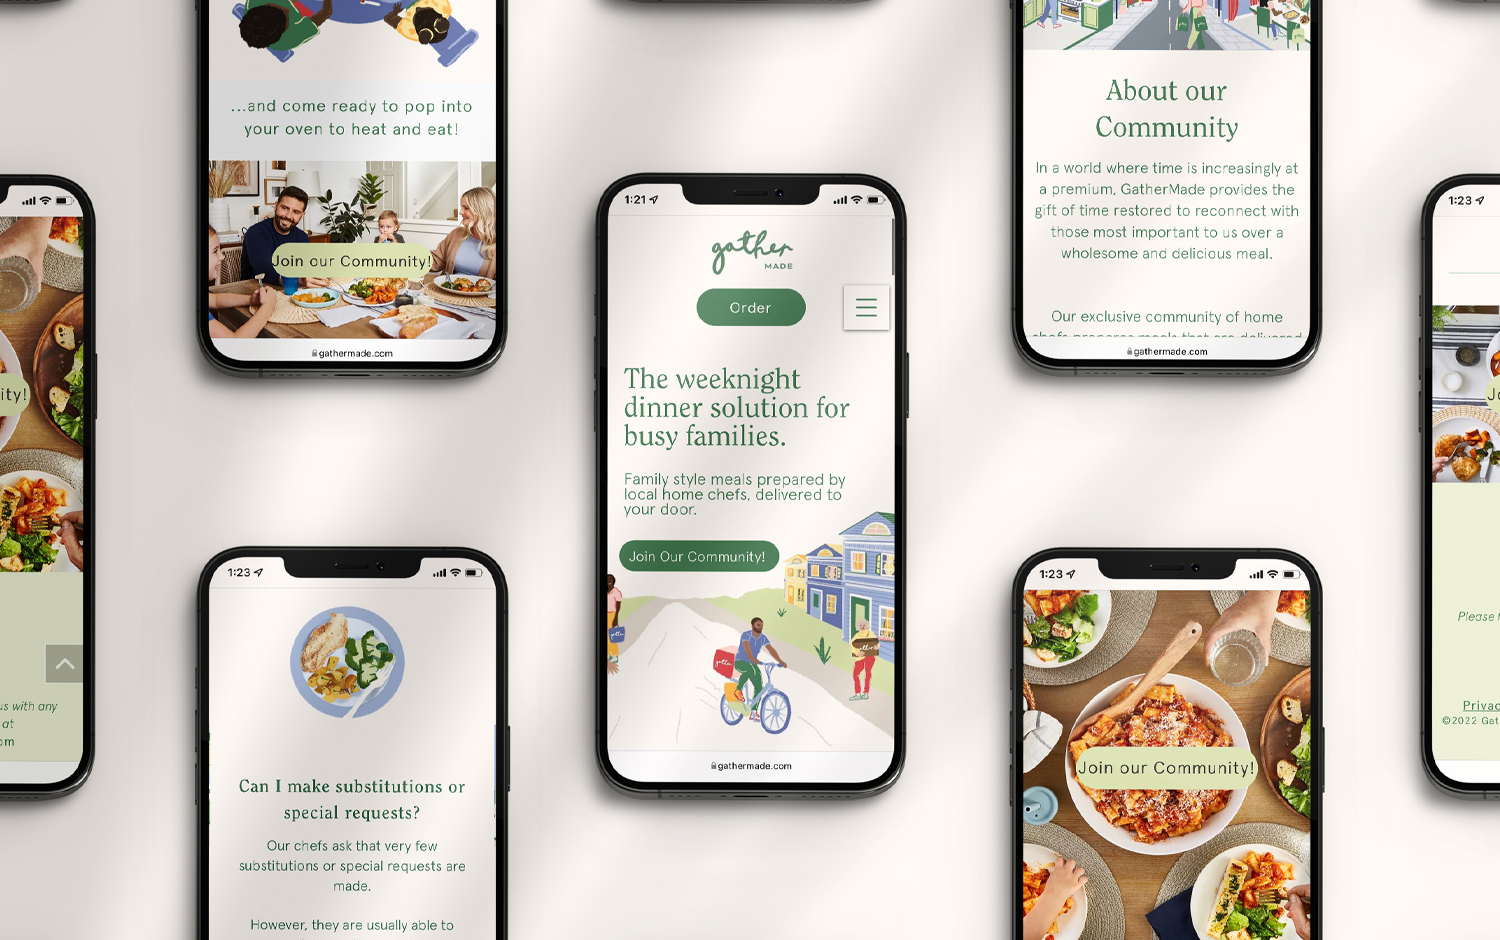 Gather Made food delivery branding by Crown Creative